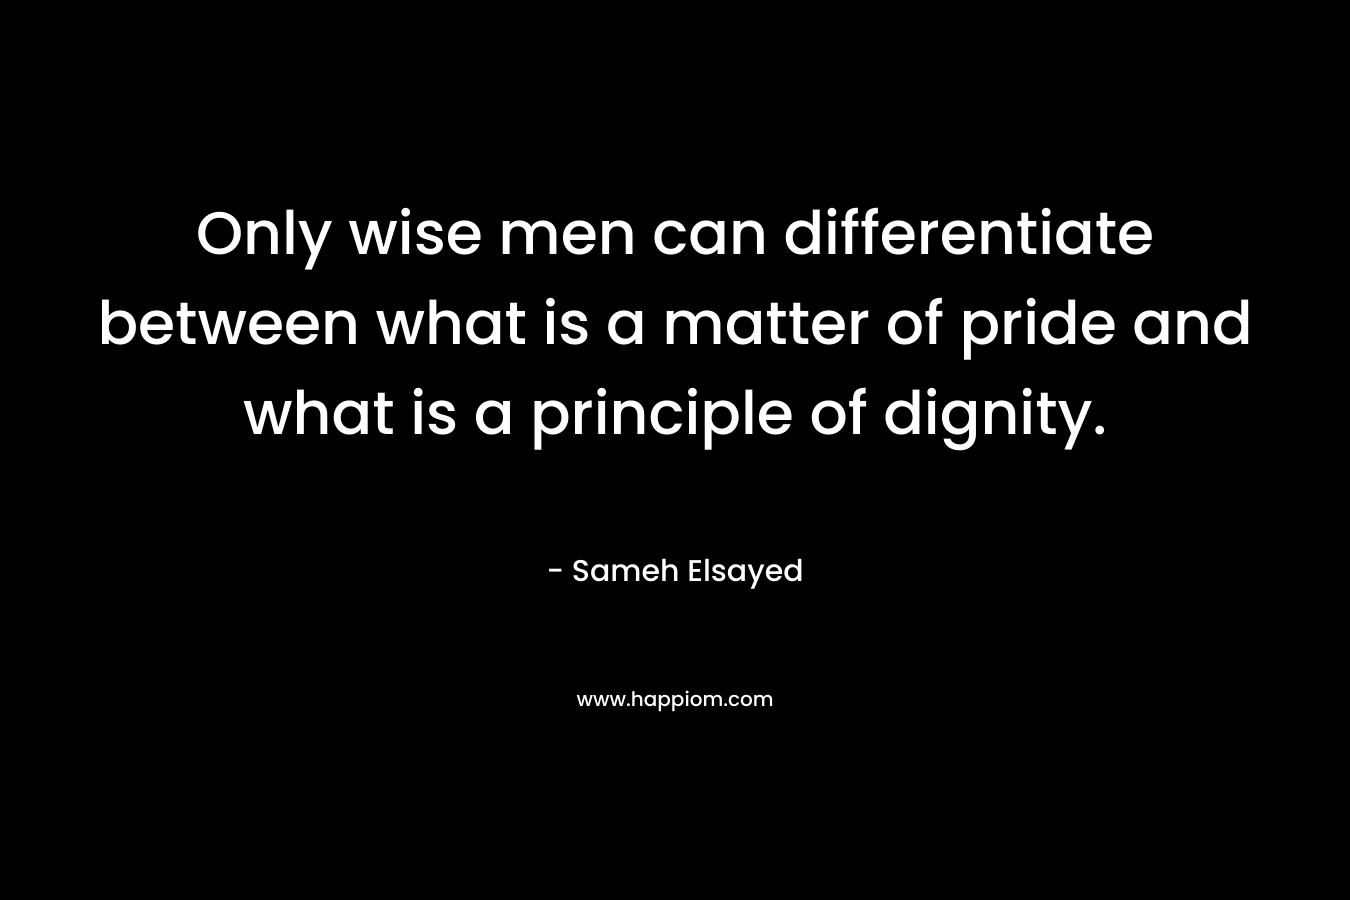 Only wise men can differentiate between what is a matter of pride and what is a principle of dignity.